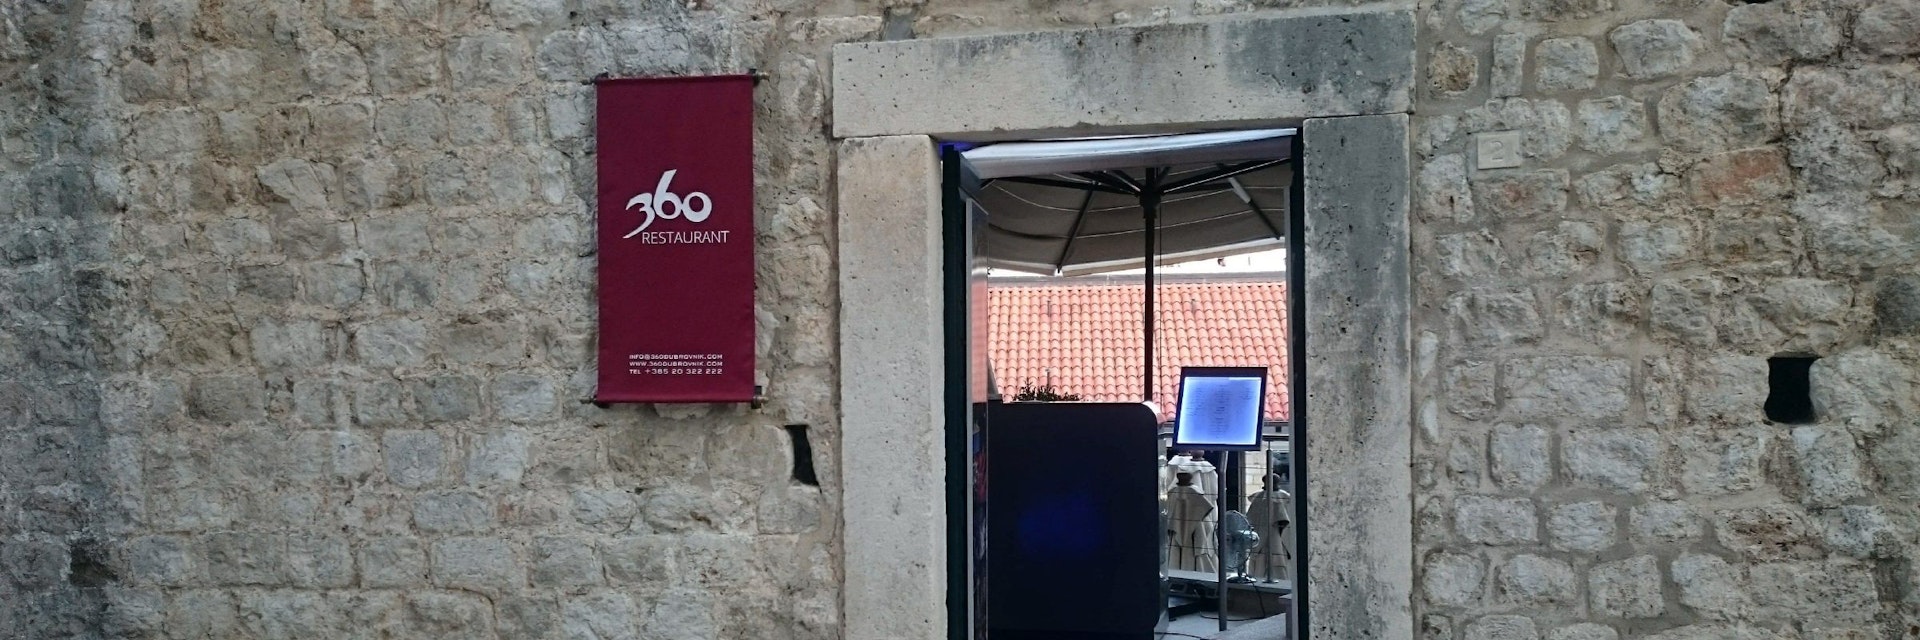 The main entrance to the restaurant 360° from Sv. Dominika street